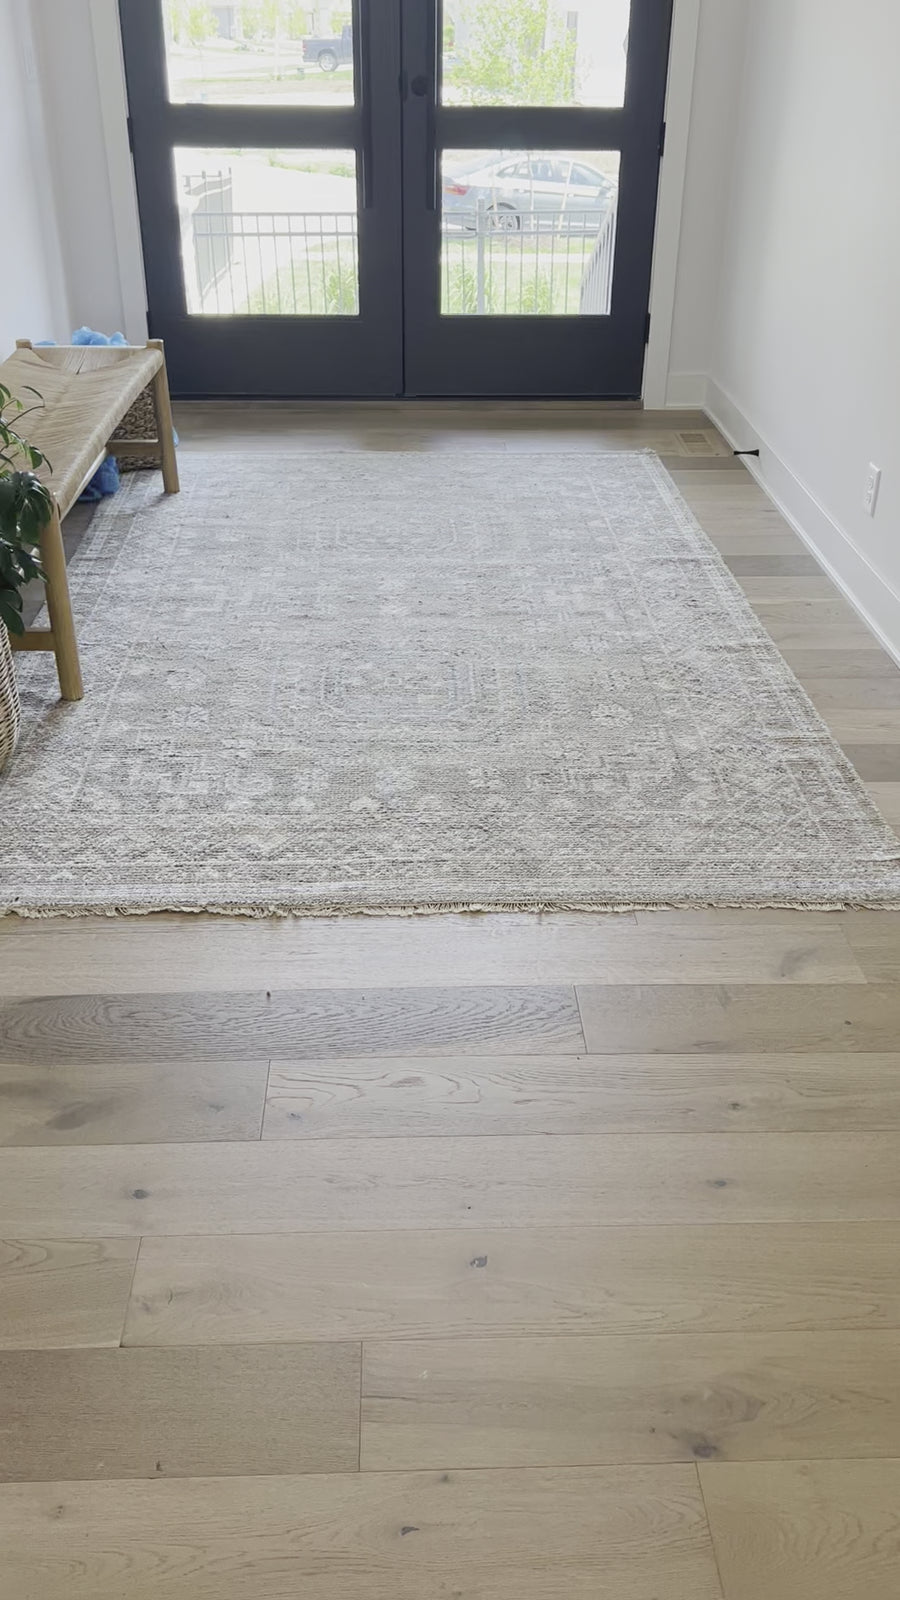 Almeria Taupe Hand-Knotted Rug